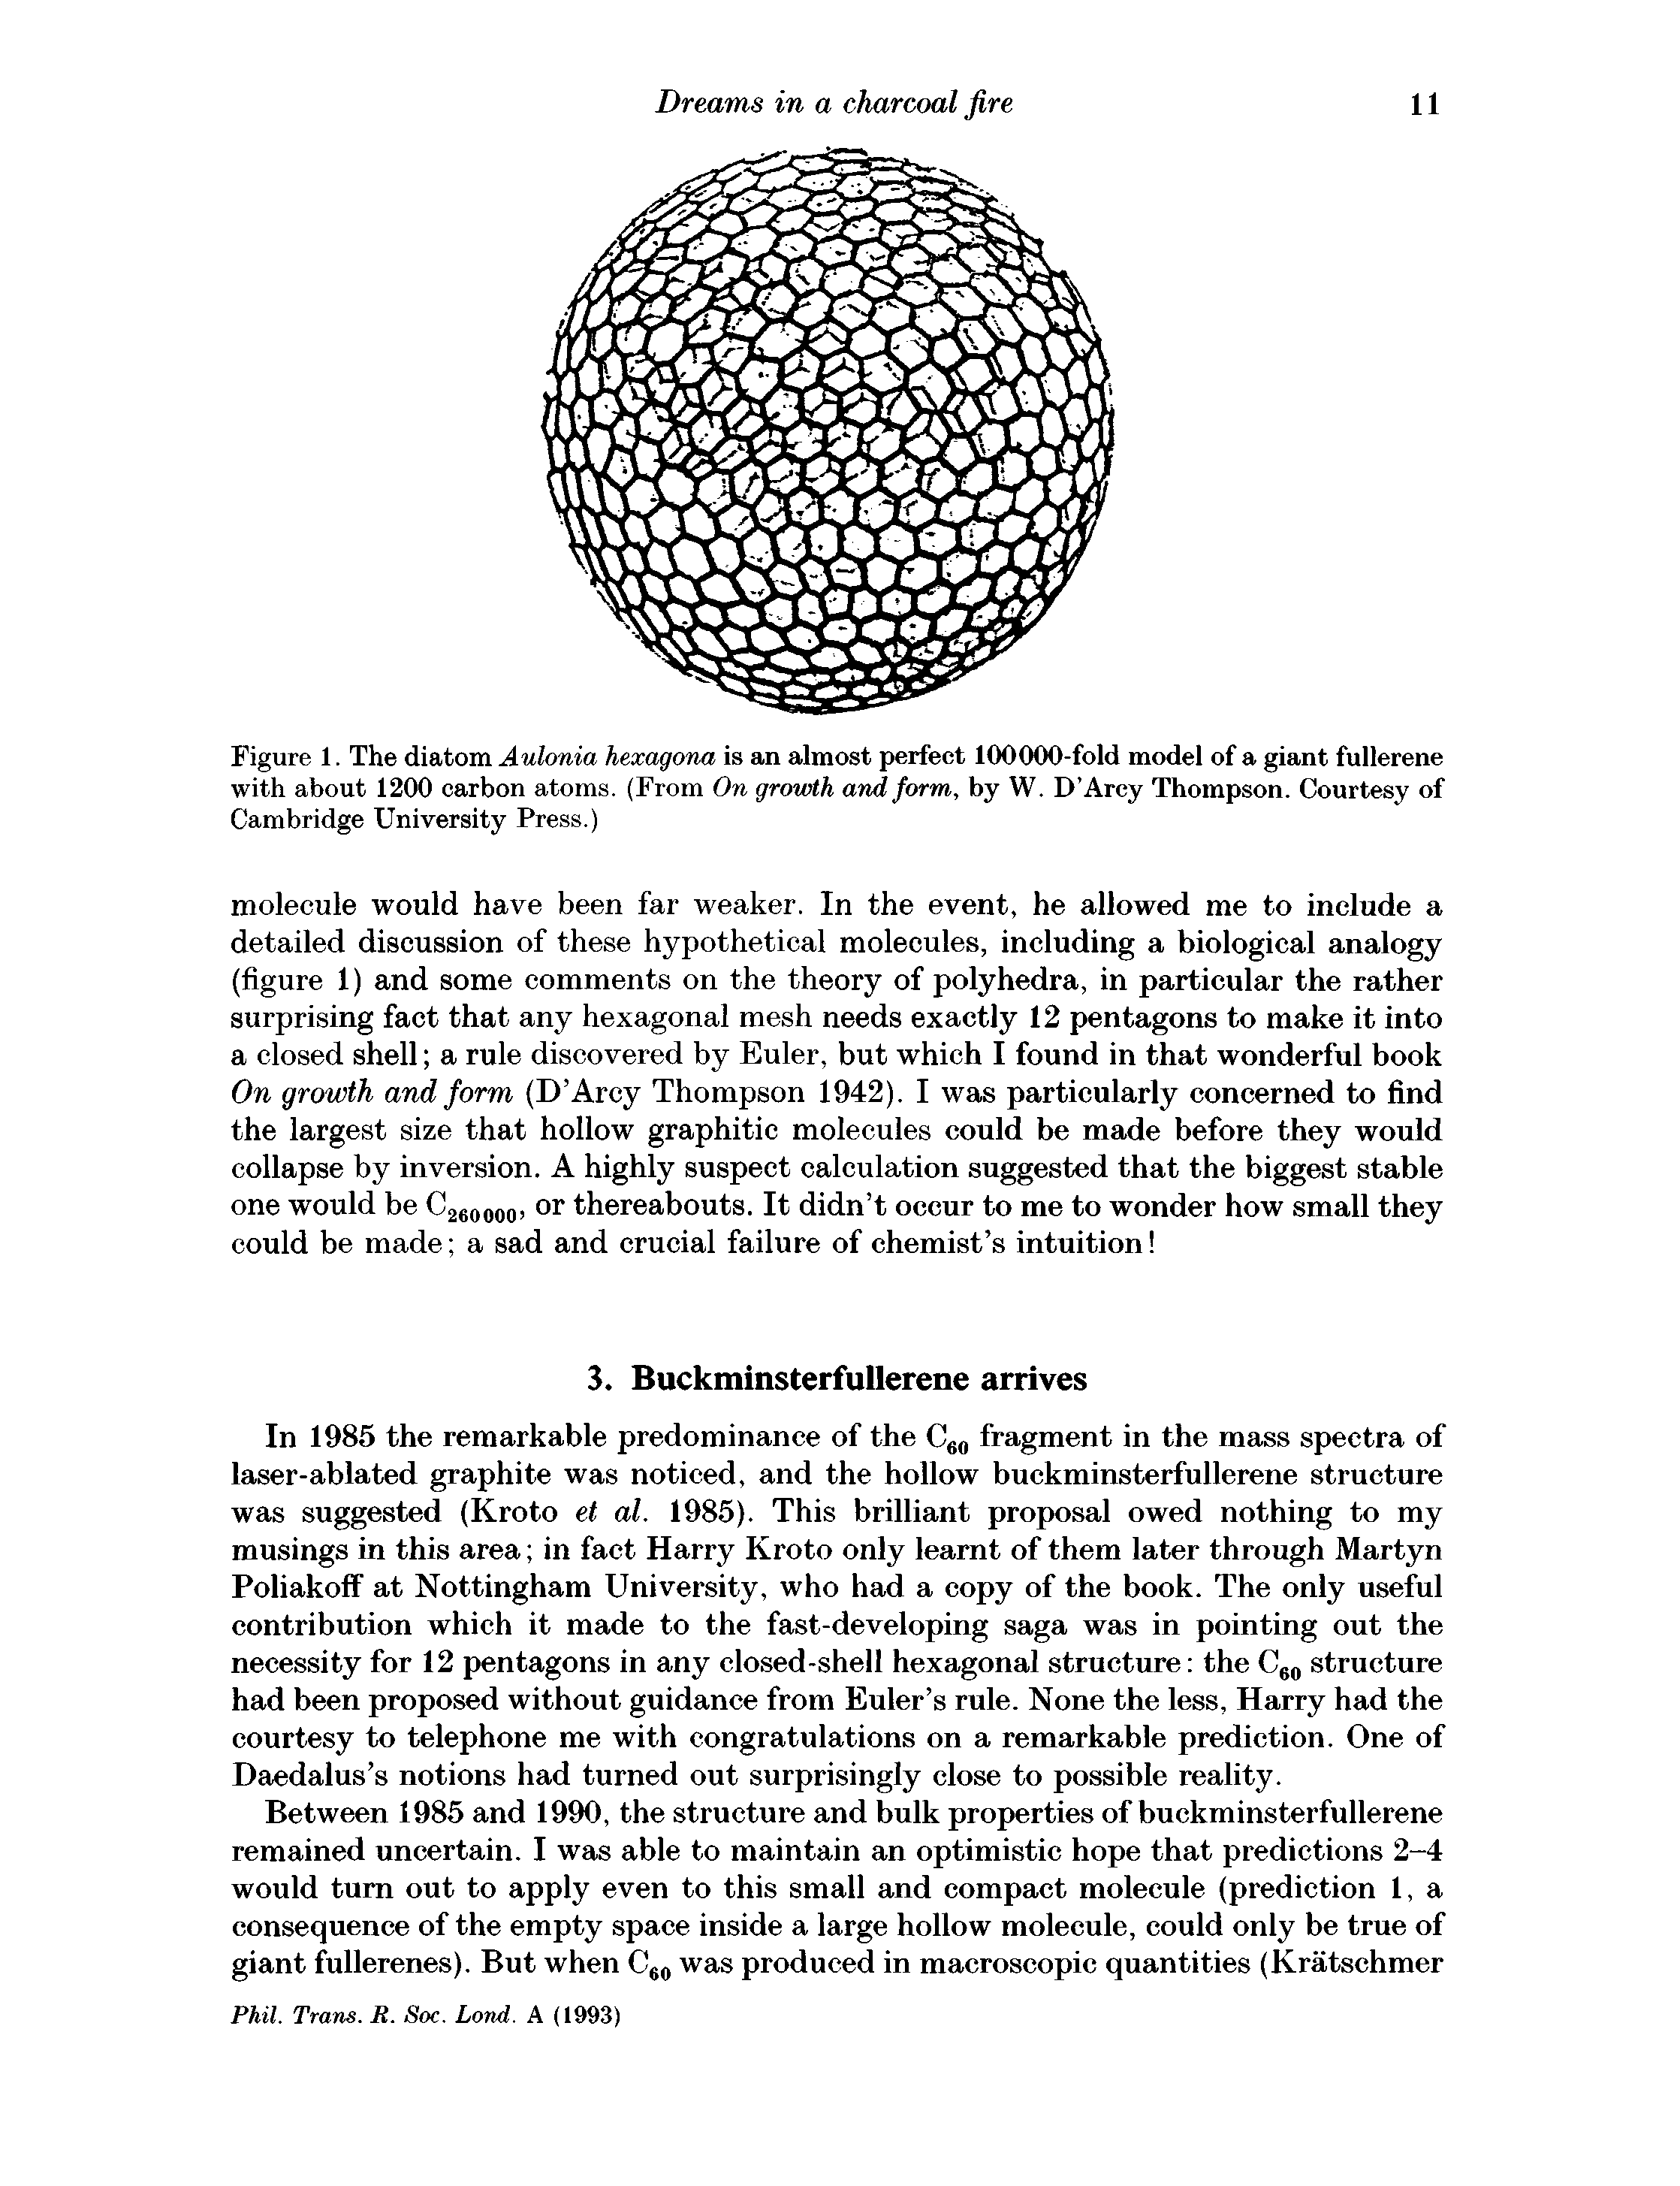 Figure 1. The diatom Aulonia hexagona is an almost perfect 100000-fold model of a giant fullerene with about 1200 carbon atoms. (From On growth and form, by W. D Arey Thompson. Courtesy of Cambridge University Press.)...